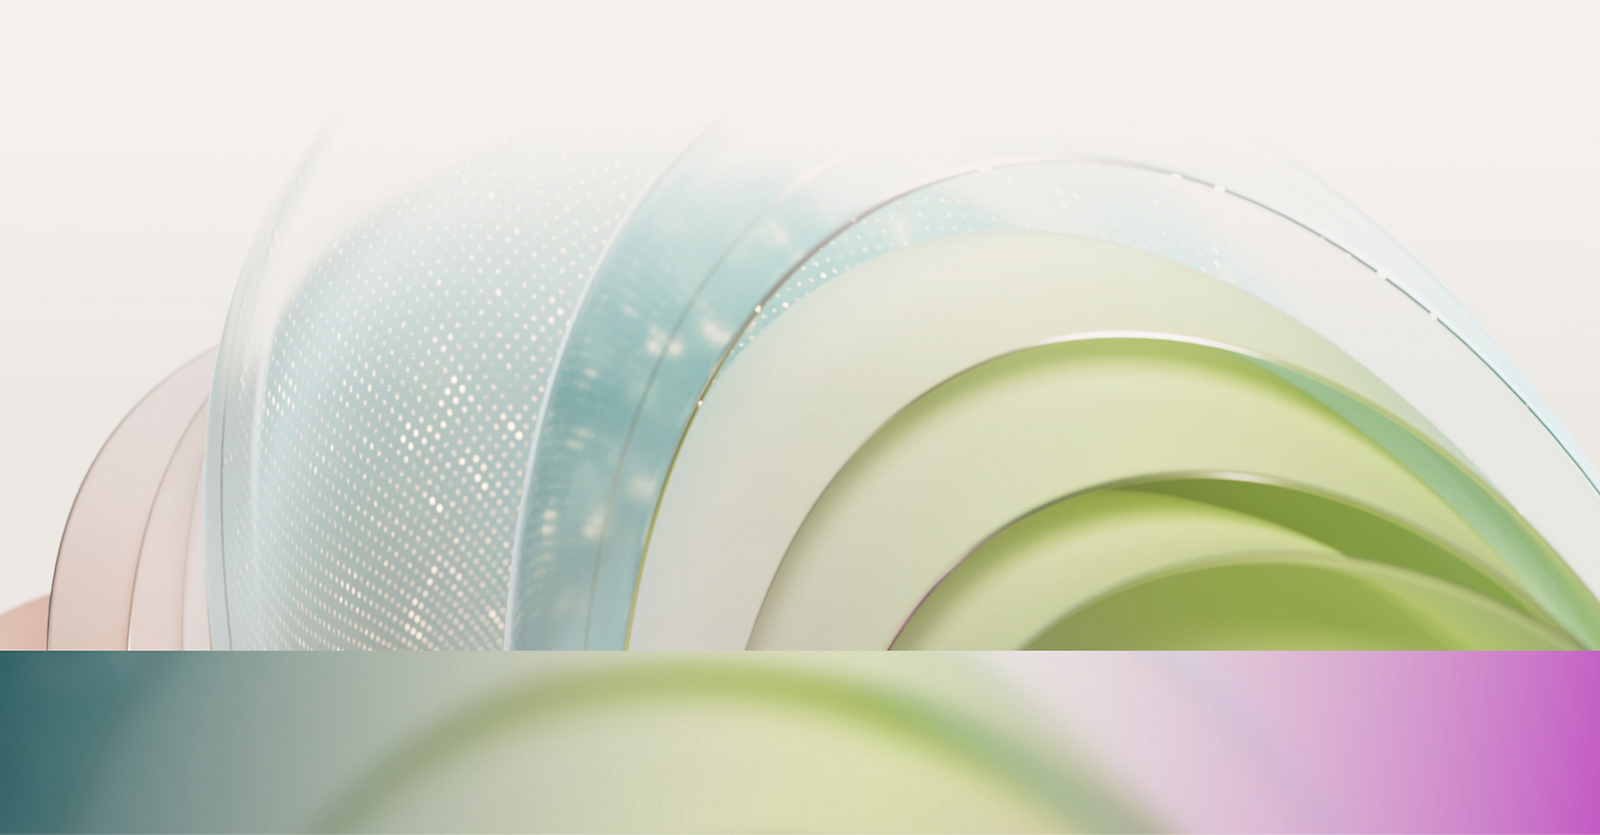 Abstract graphic of overlapping translucent circles in shades of blue, green, and pink with a soft, glowing effect.